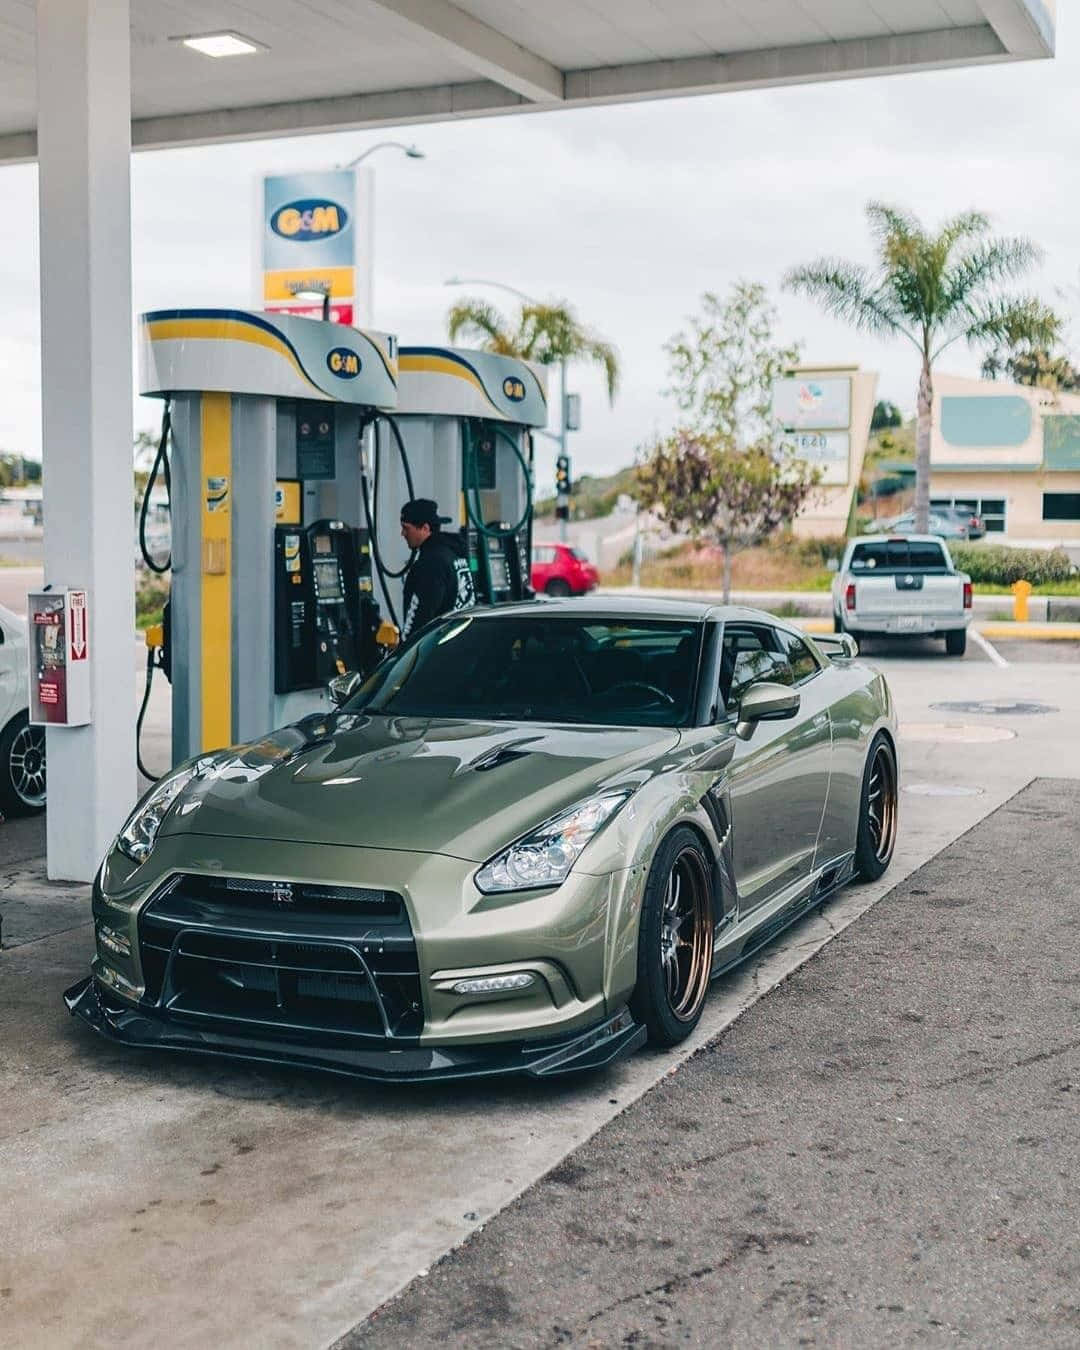 Nissan R35 Gtr At Gas Station Picture